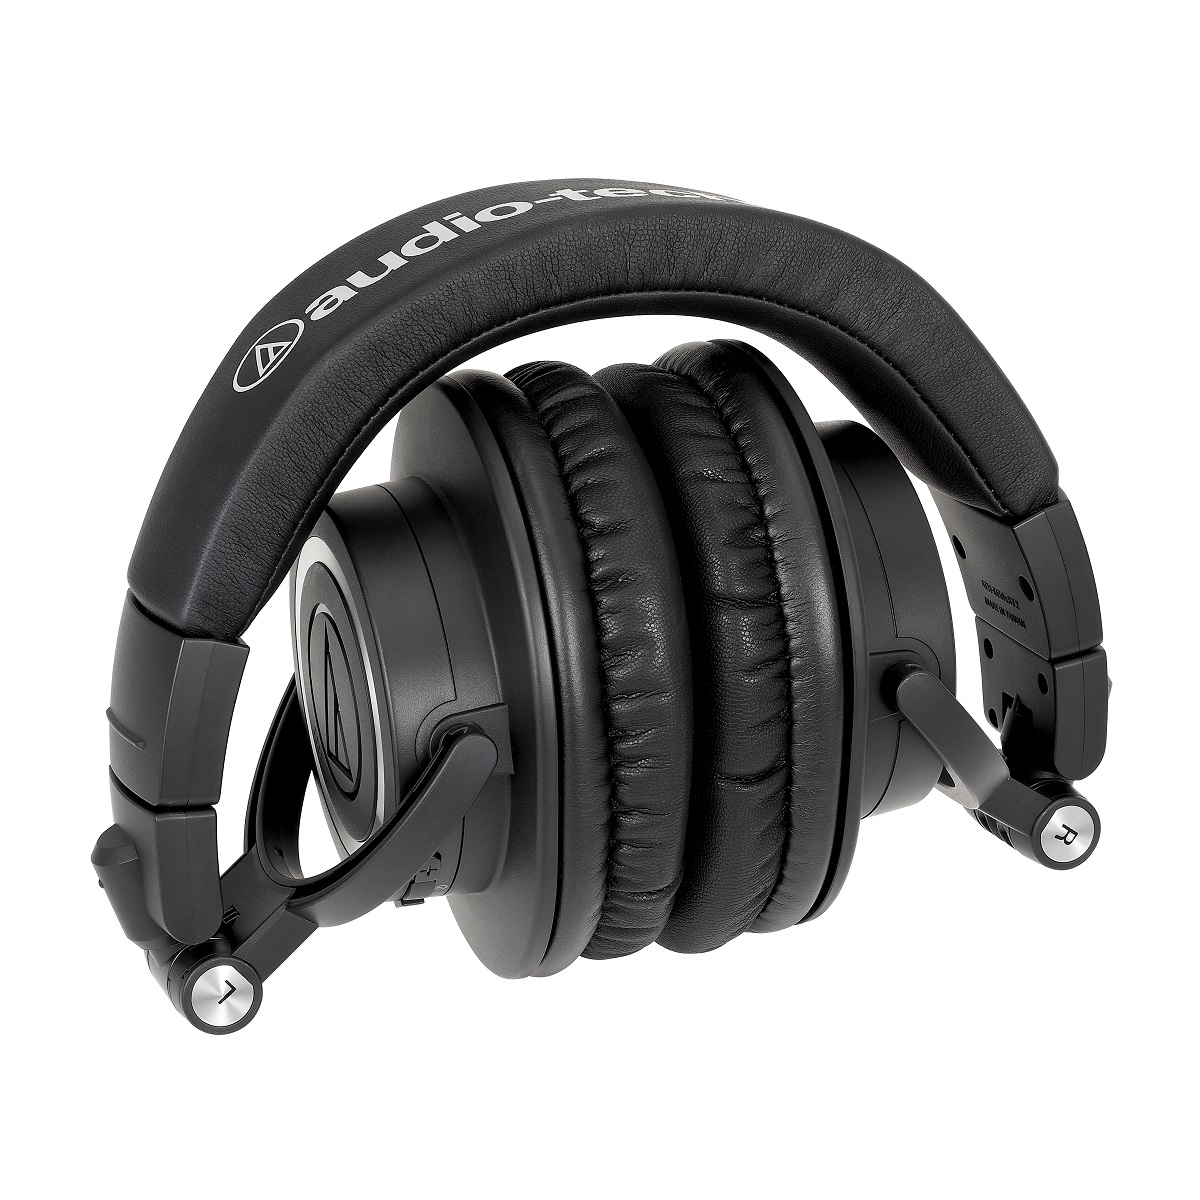 AudioTechnica ATH-M50xBT2 Wireless Over-Ear Headphones with Bluetooth (Black) - image 3 of 8